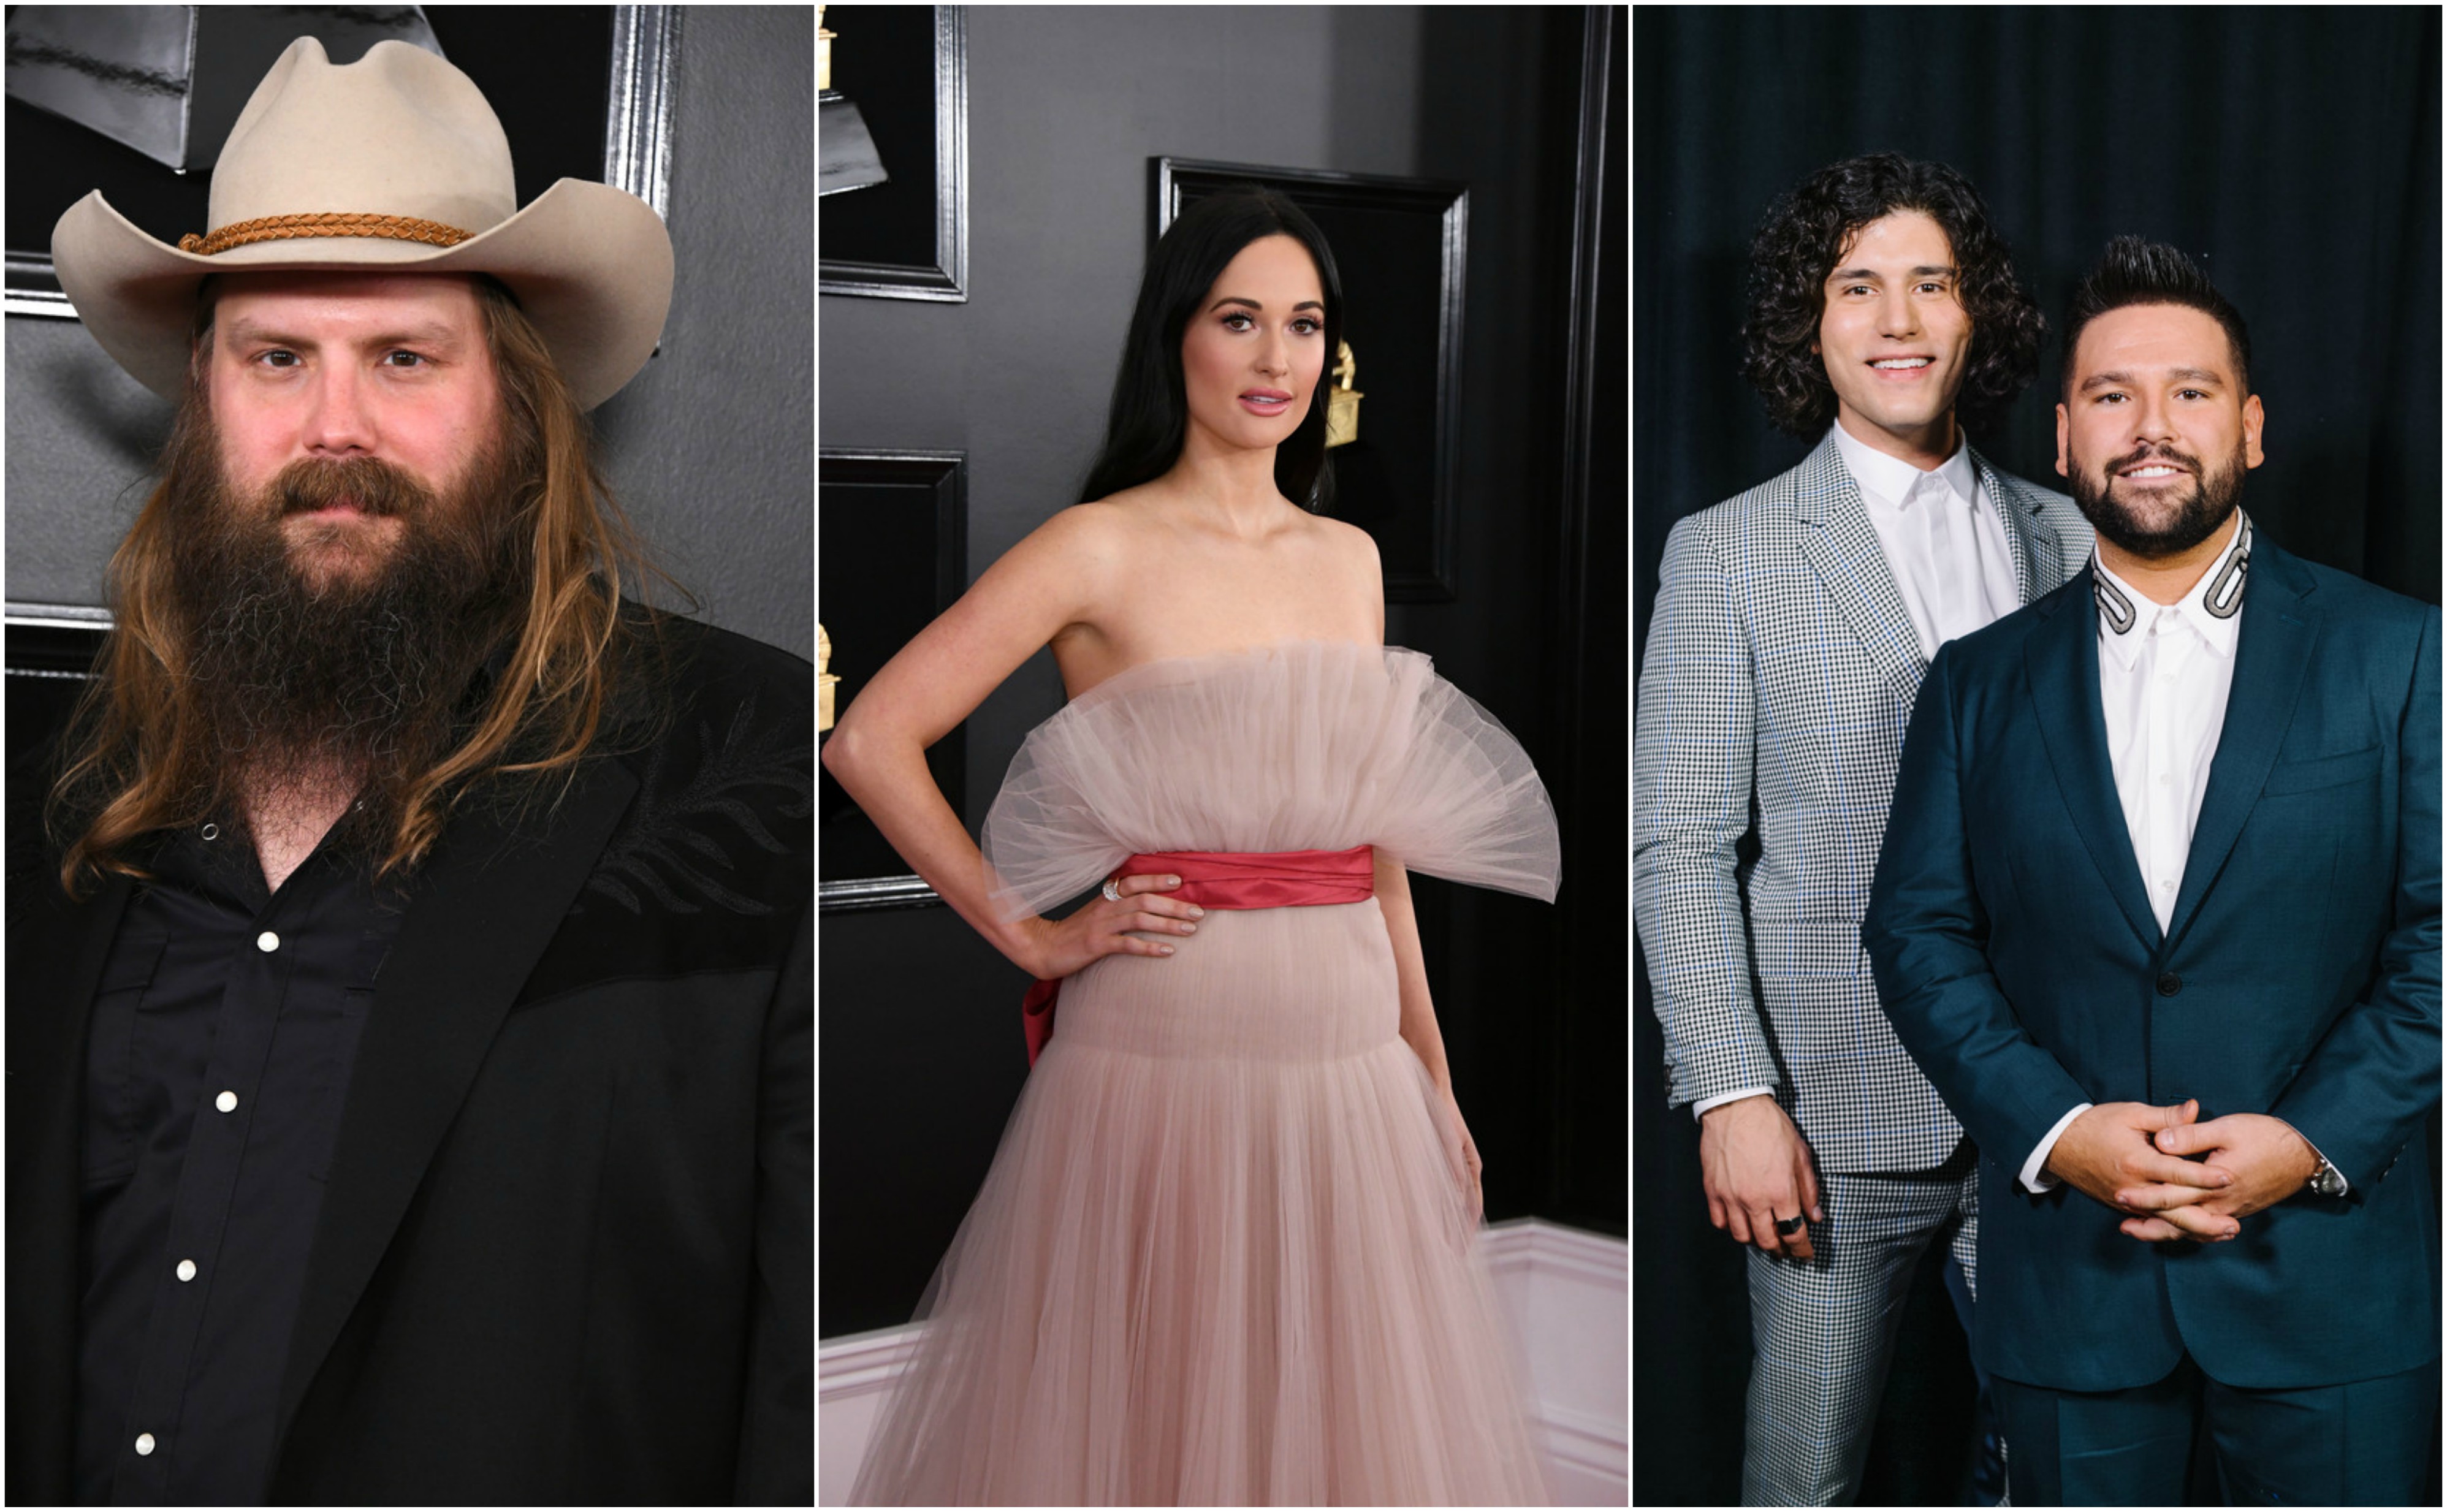 Chris Stapleton, Dan + Shay, and Kacey Musgraves Among Nominees for 54th Academy of Country Music Awards